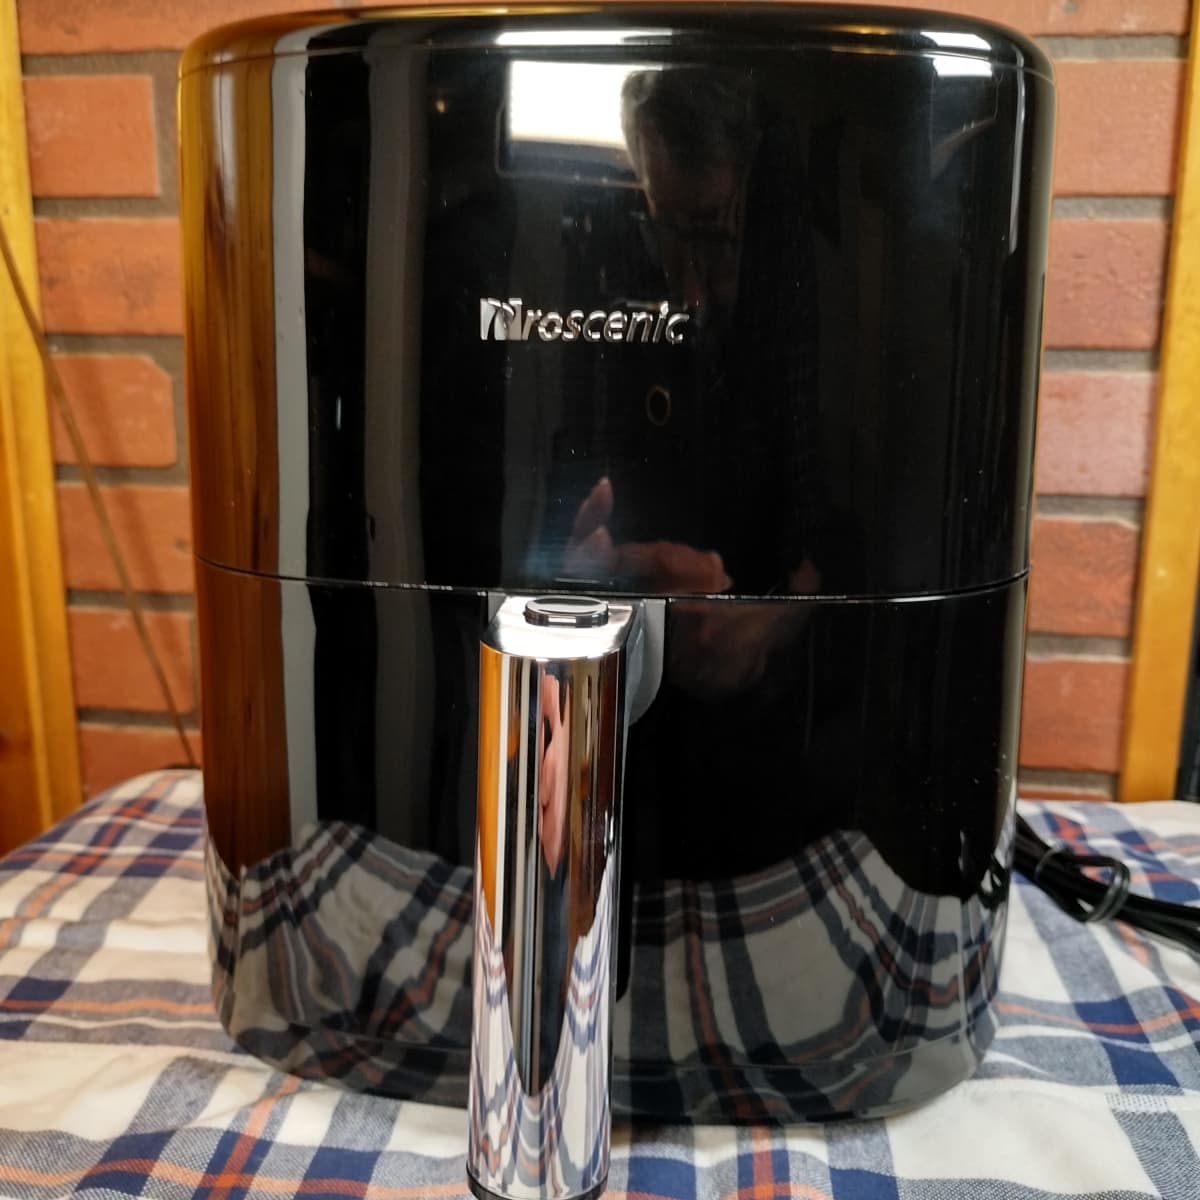 Review of the Proscenic T22 Air Fryer - Delishably